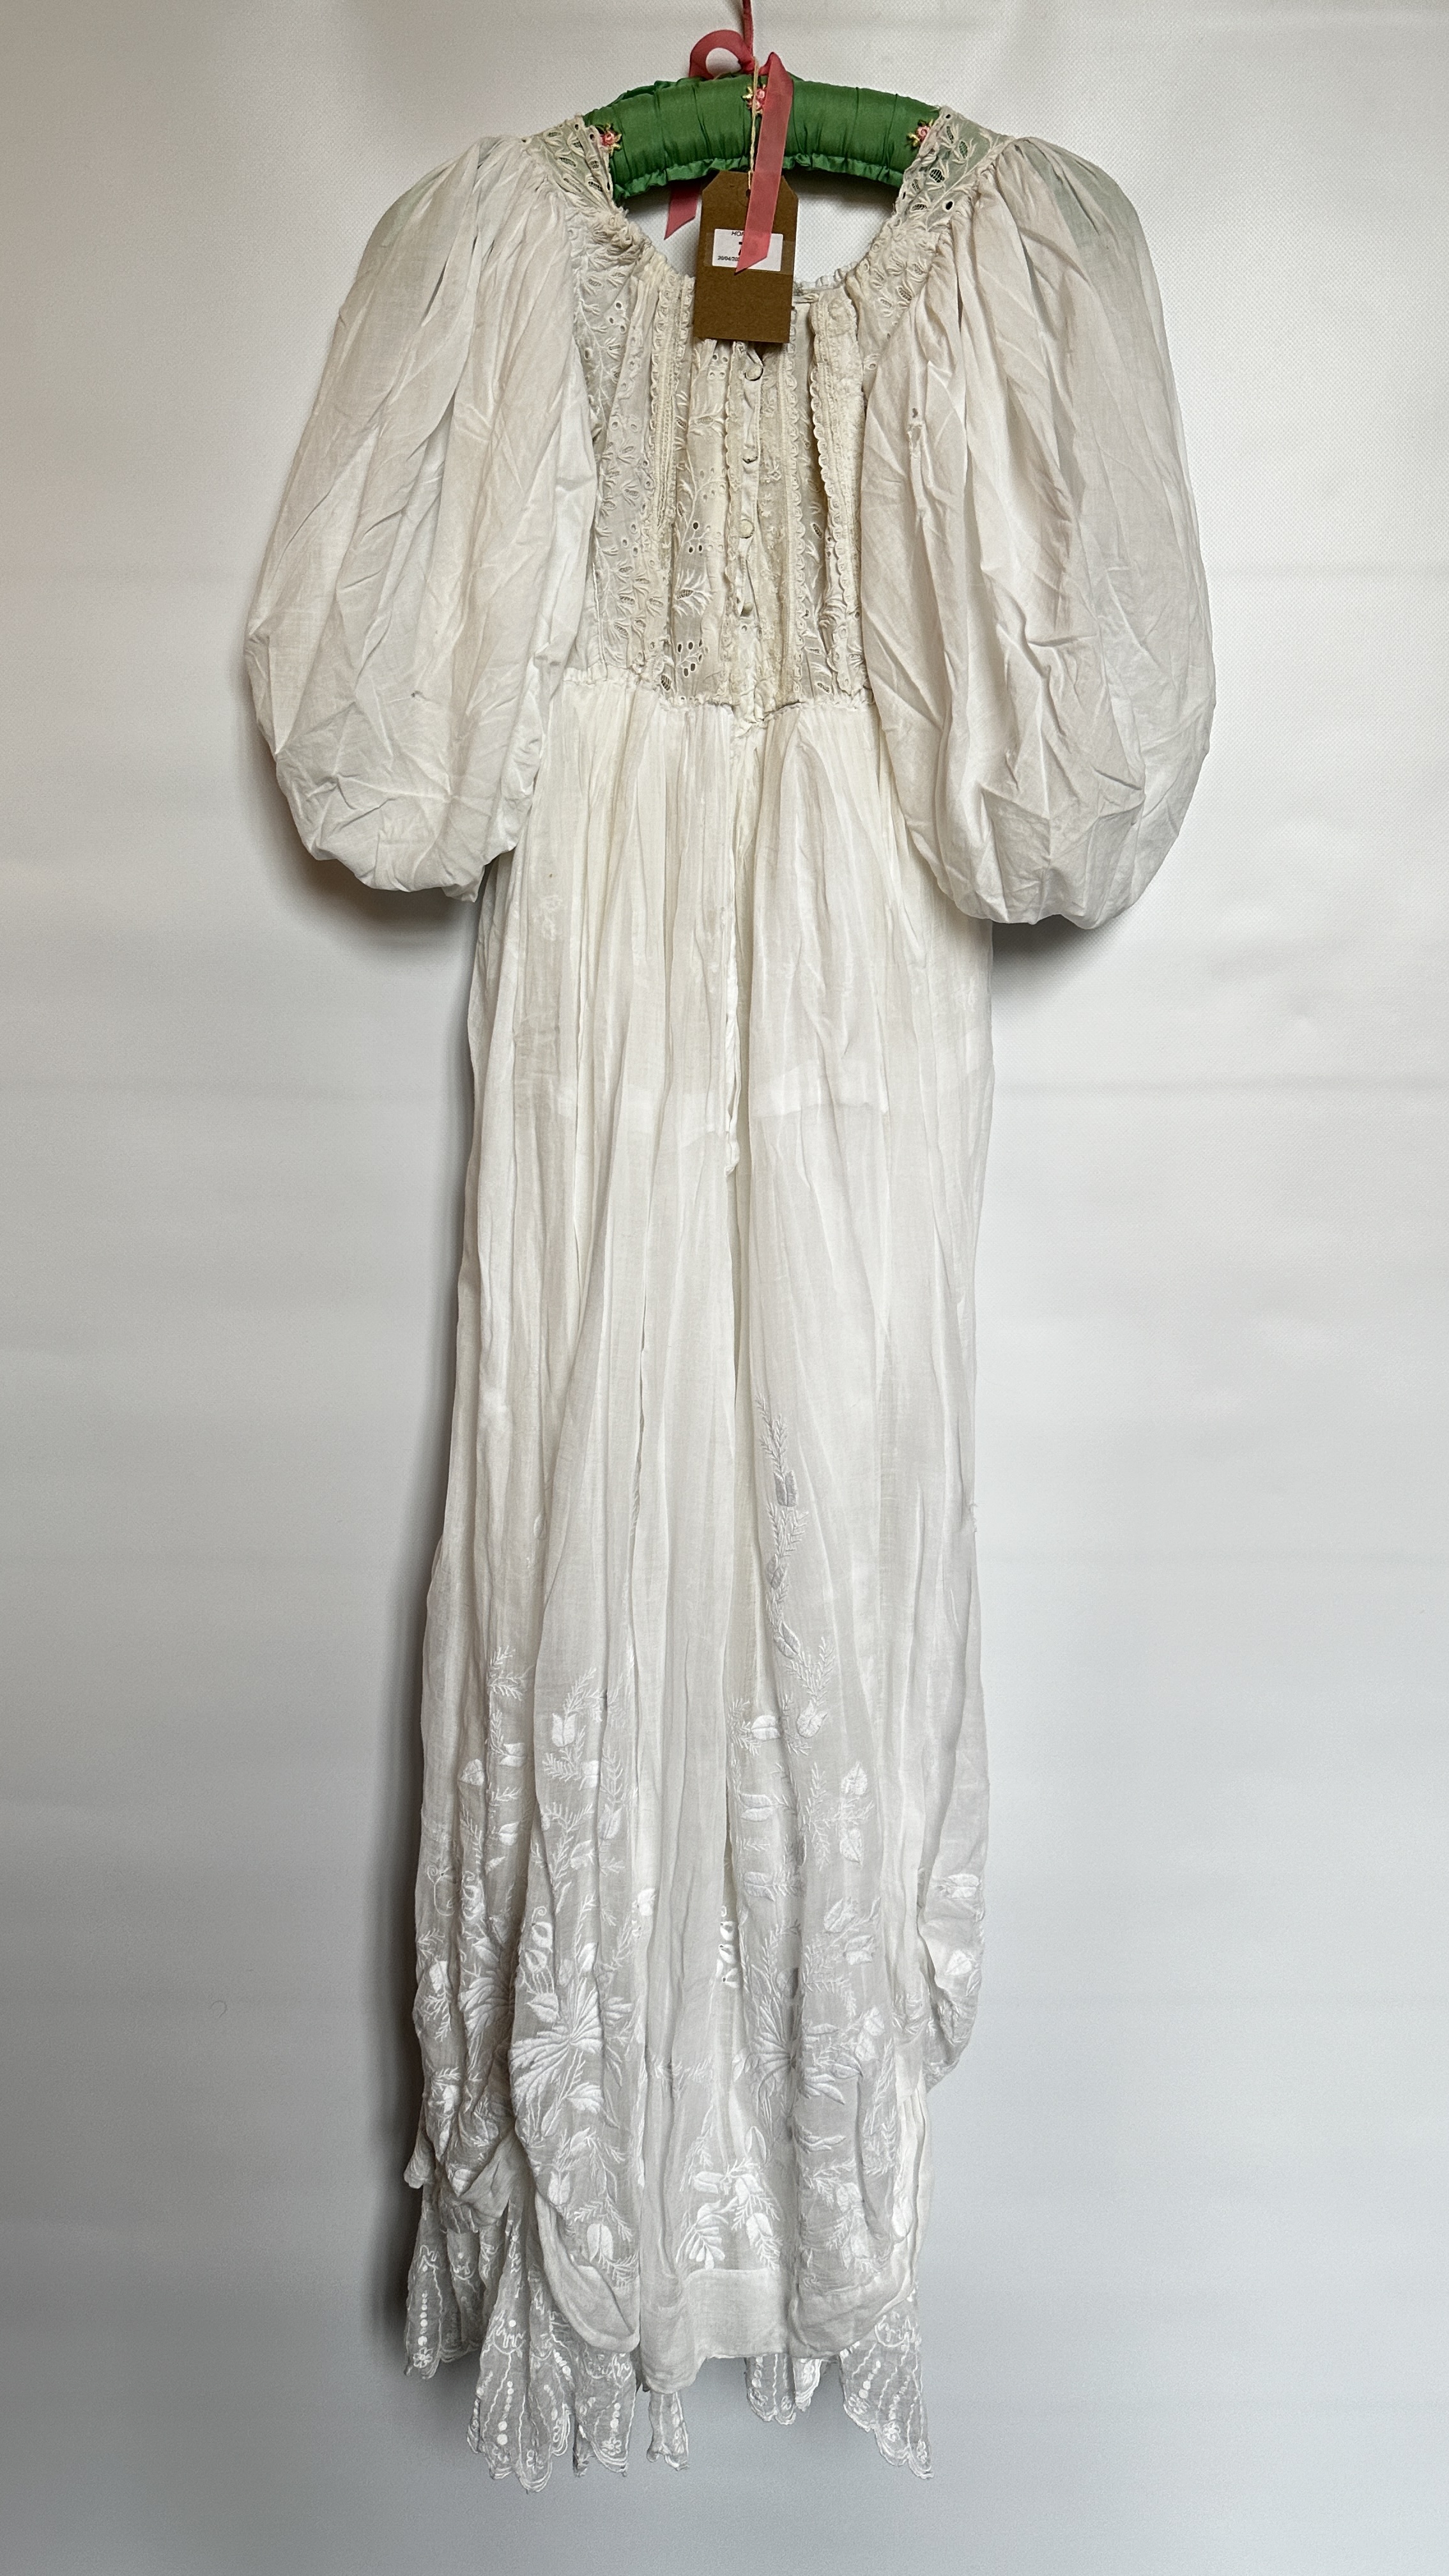 FINE WHITE COTTON EDWARDIAN DRESS, ALL OVER EMBROIDERY, EMPIRE LINE, PUFFED SLEEVES - A/F CONDITION, - Image 12 of 20